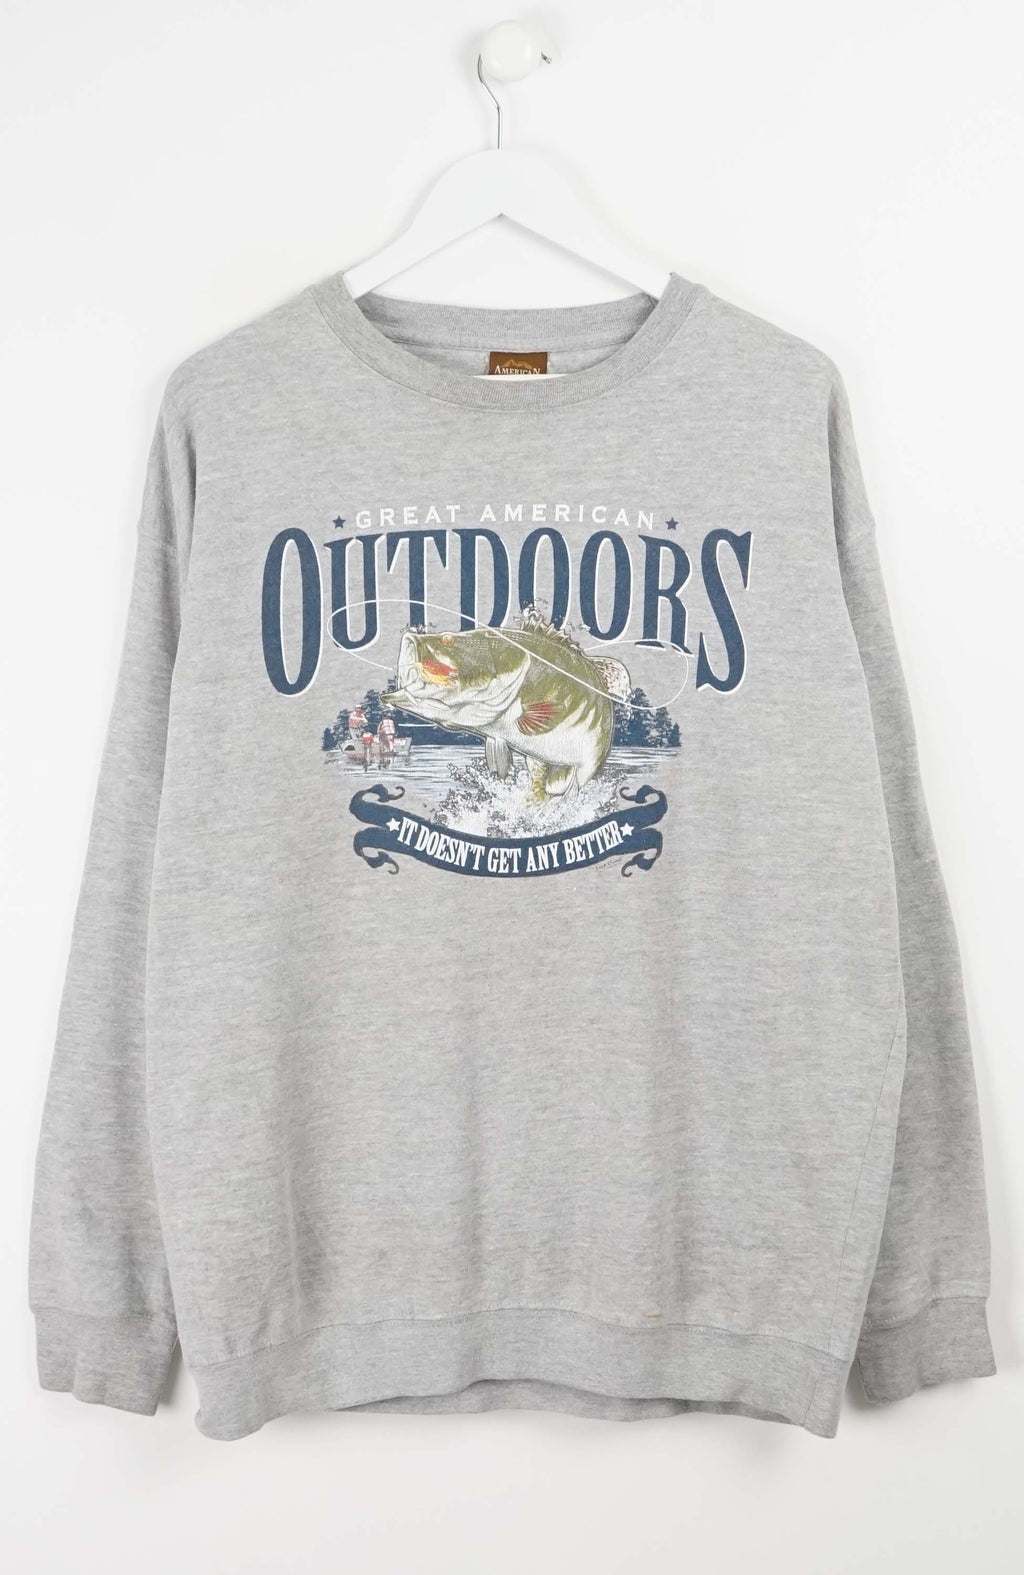 VINTAGE GREAT AMERICAN OUTDOORS SWEATER (L)